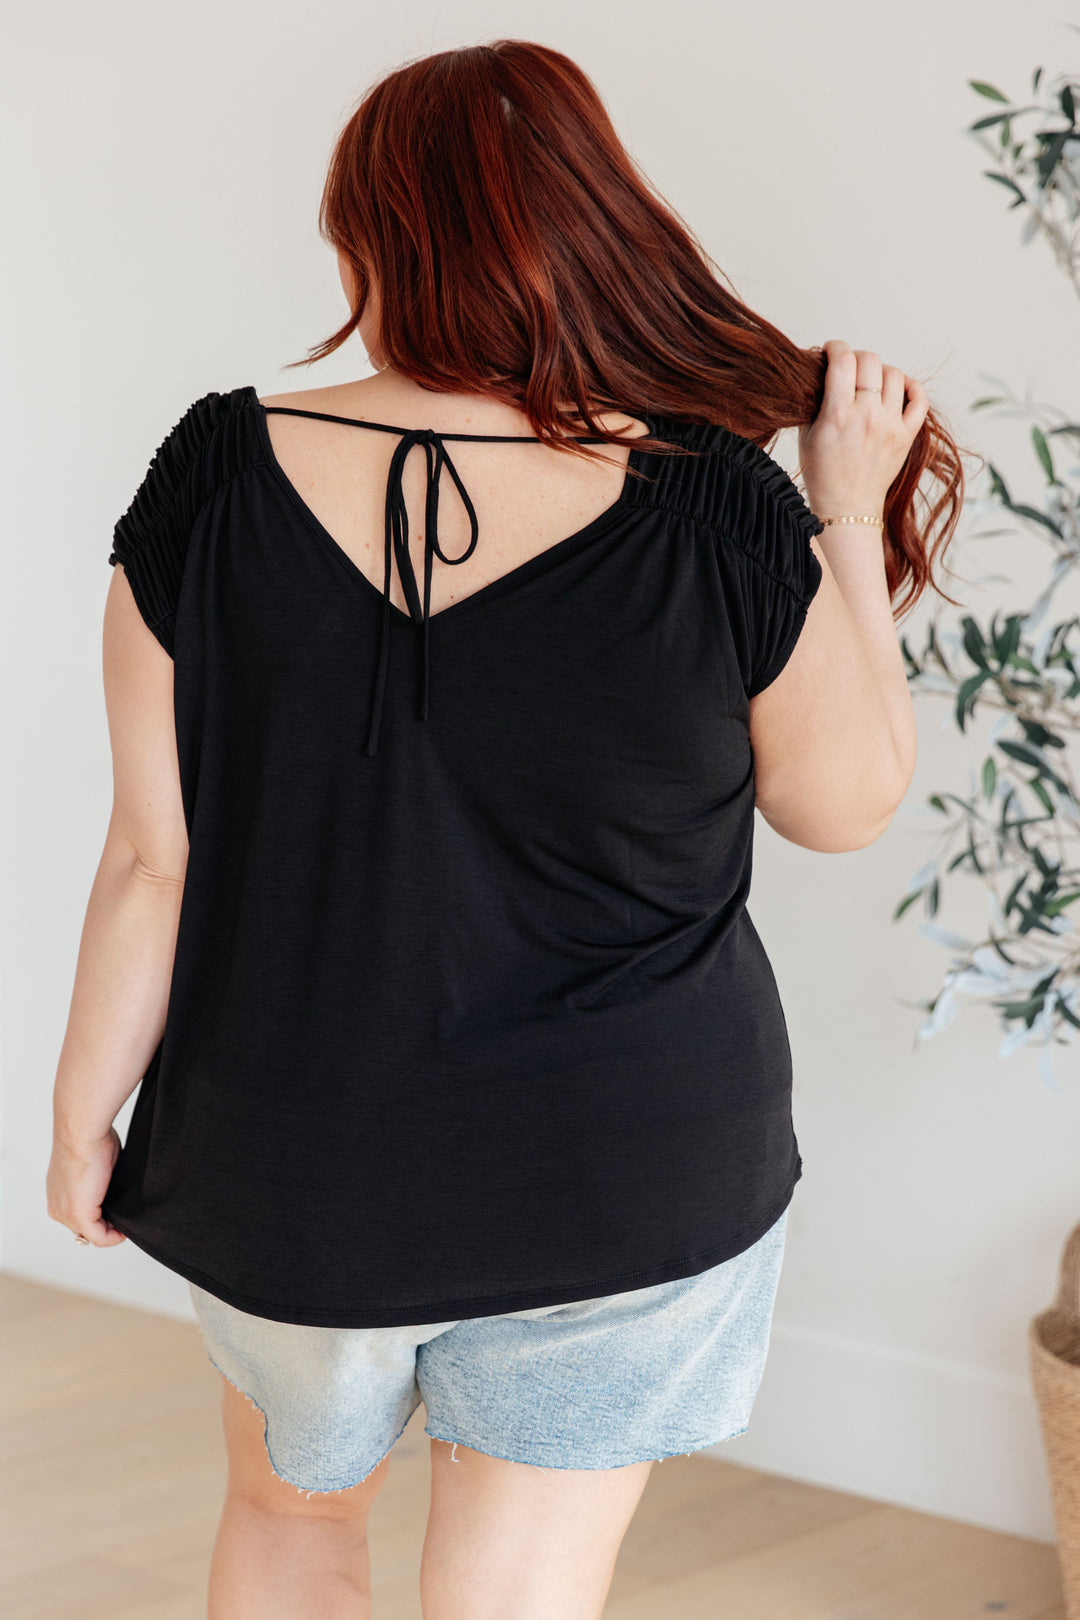 Keeping It Cool - Ruched Top - Black